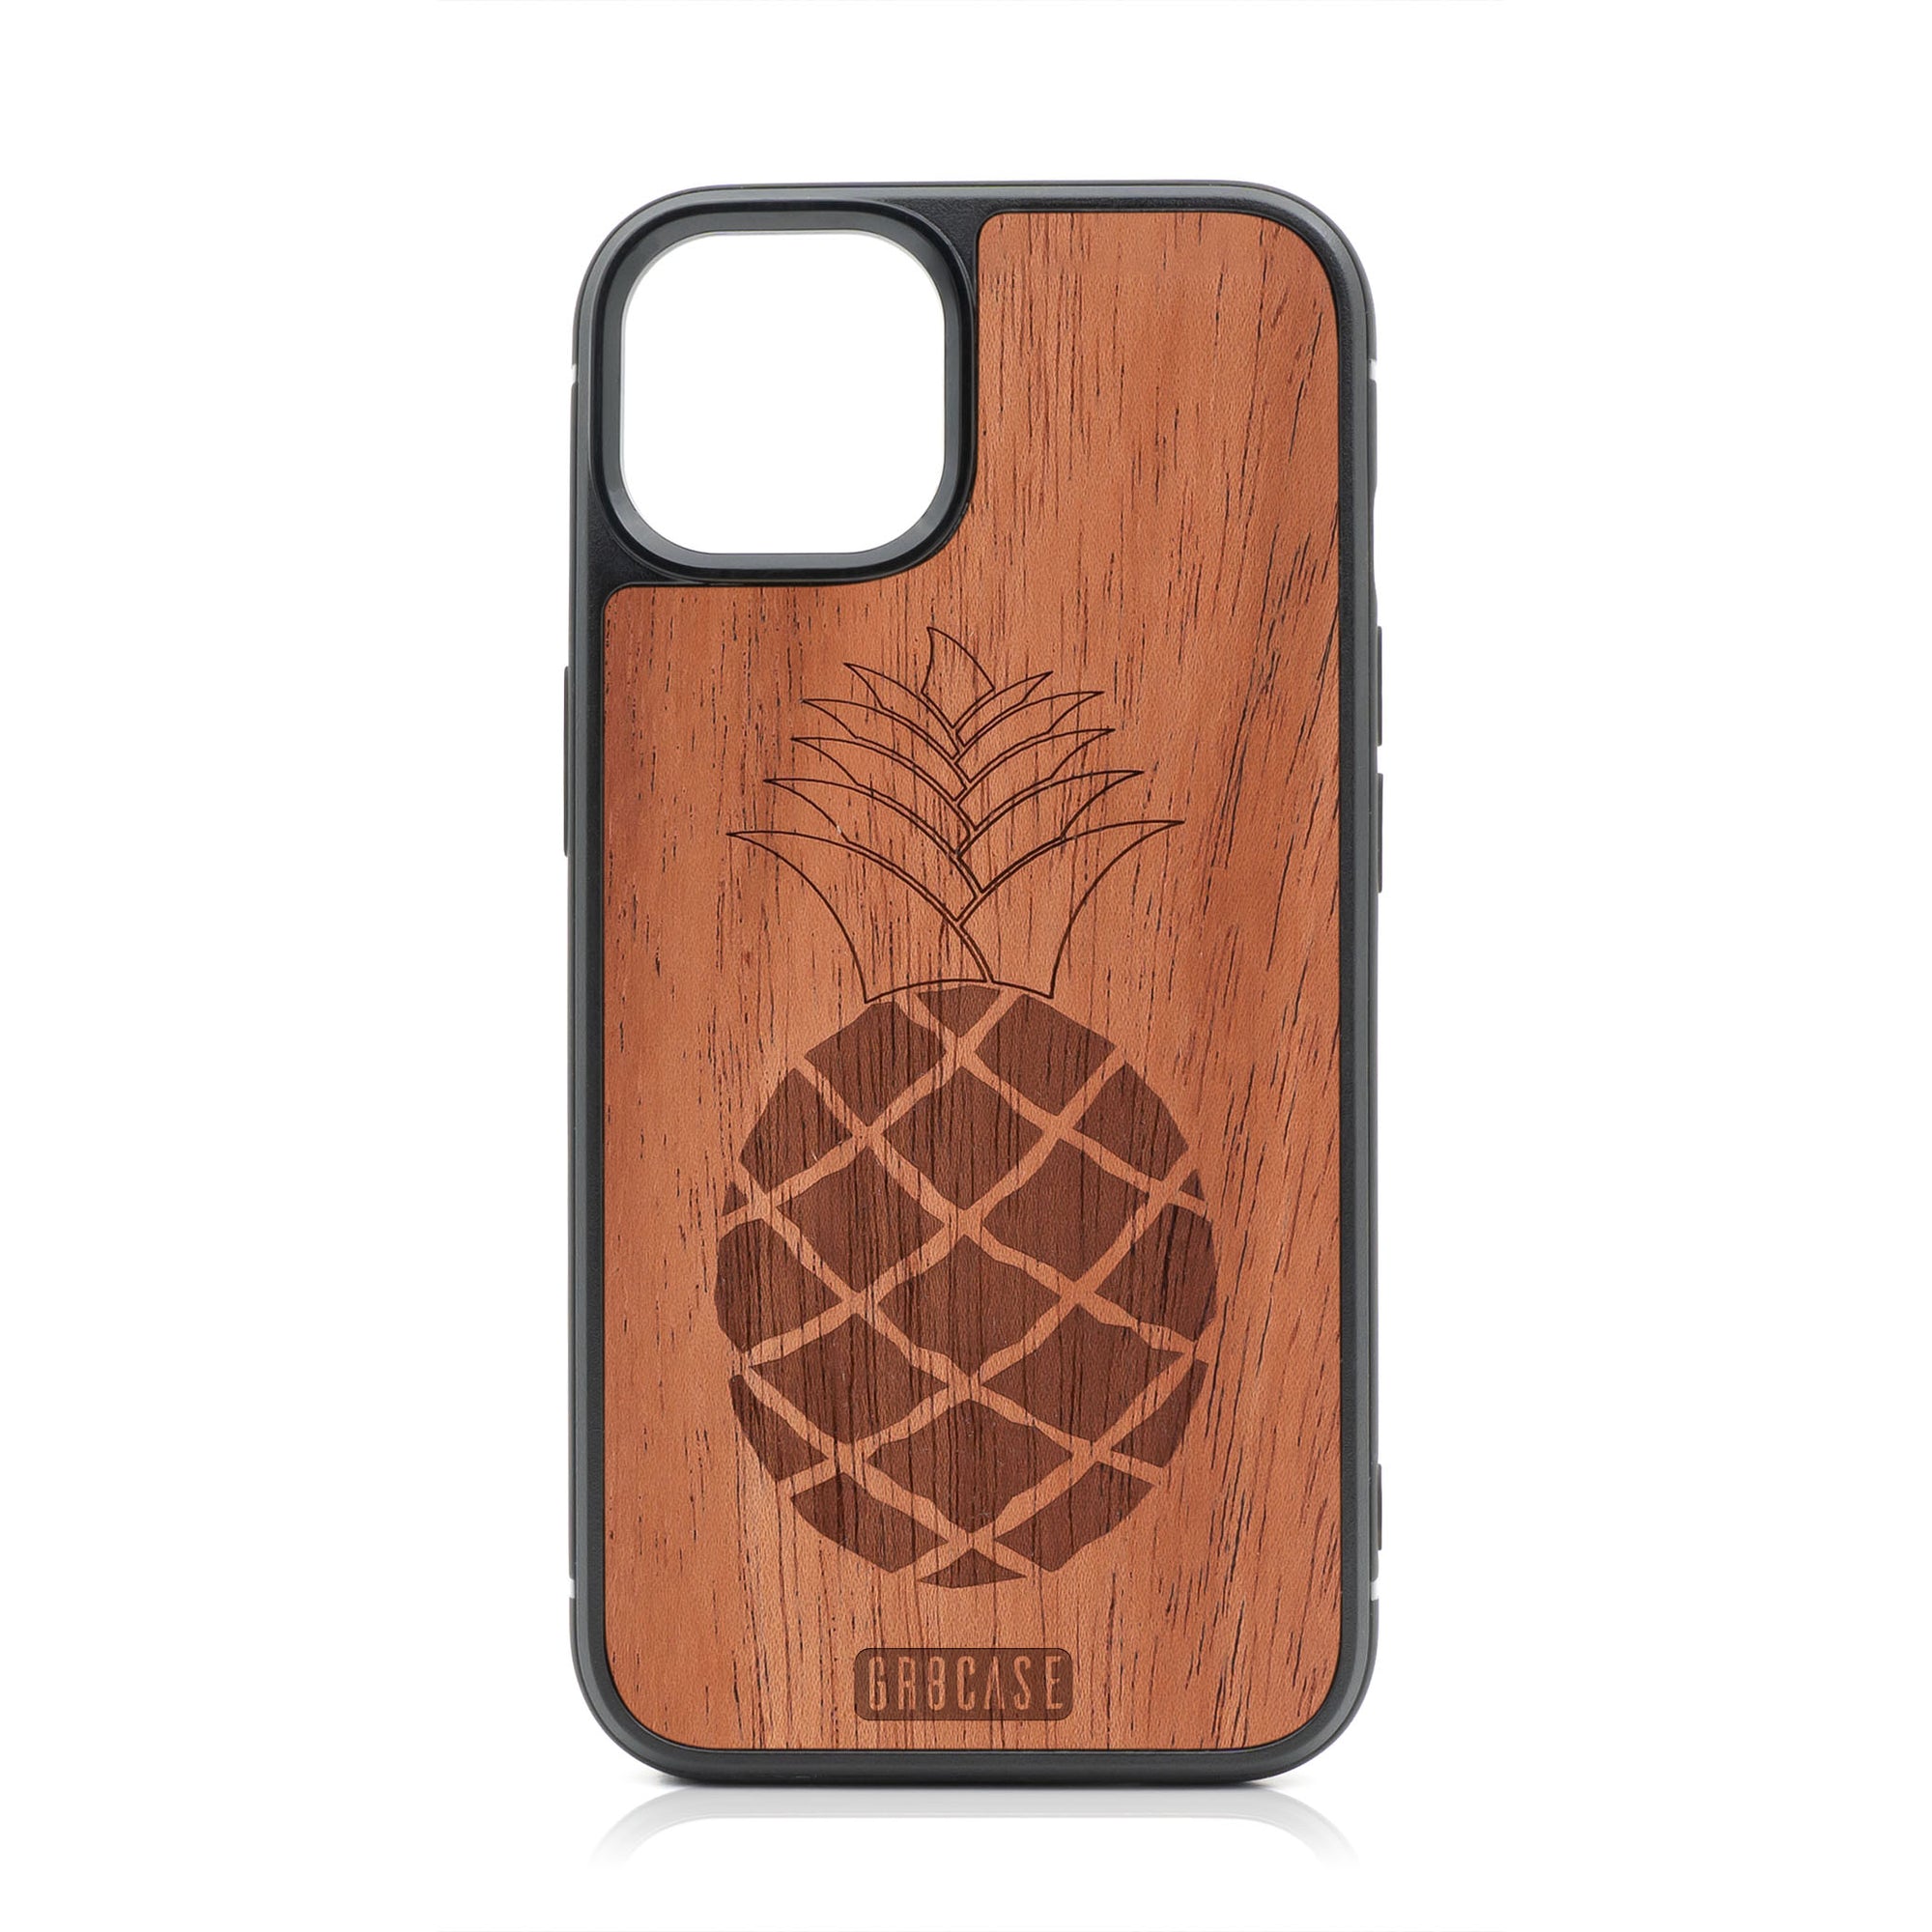 Pineapple Design Wood Case For iPhone 13